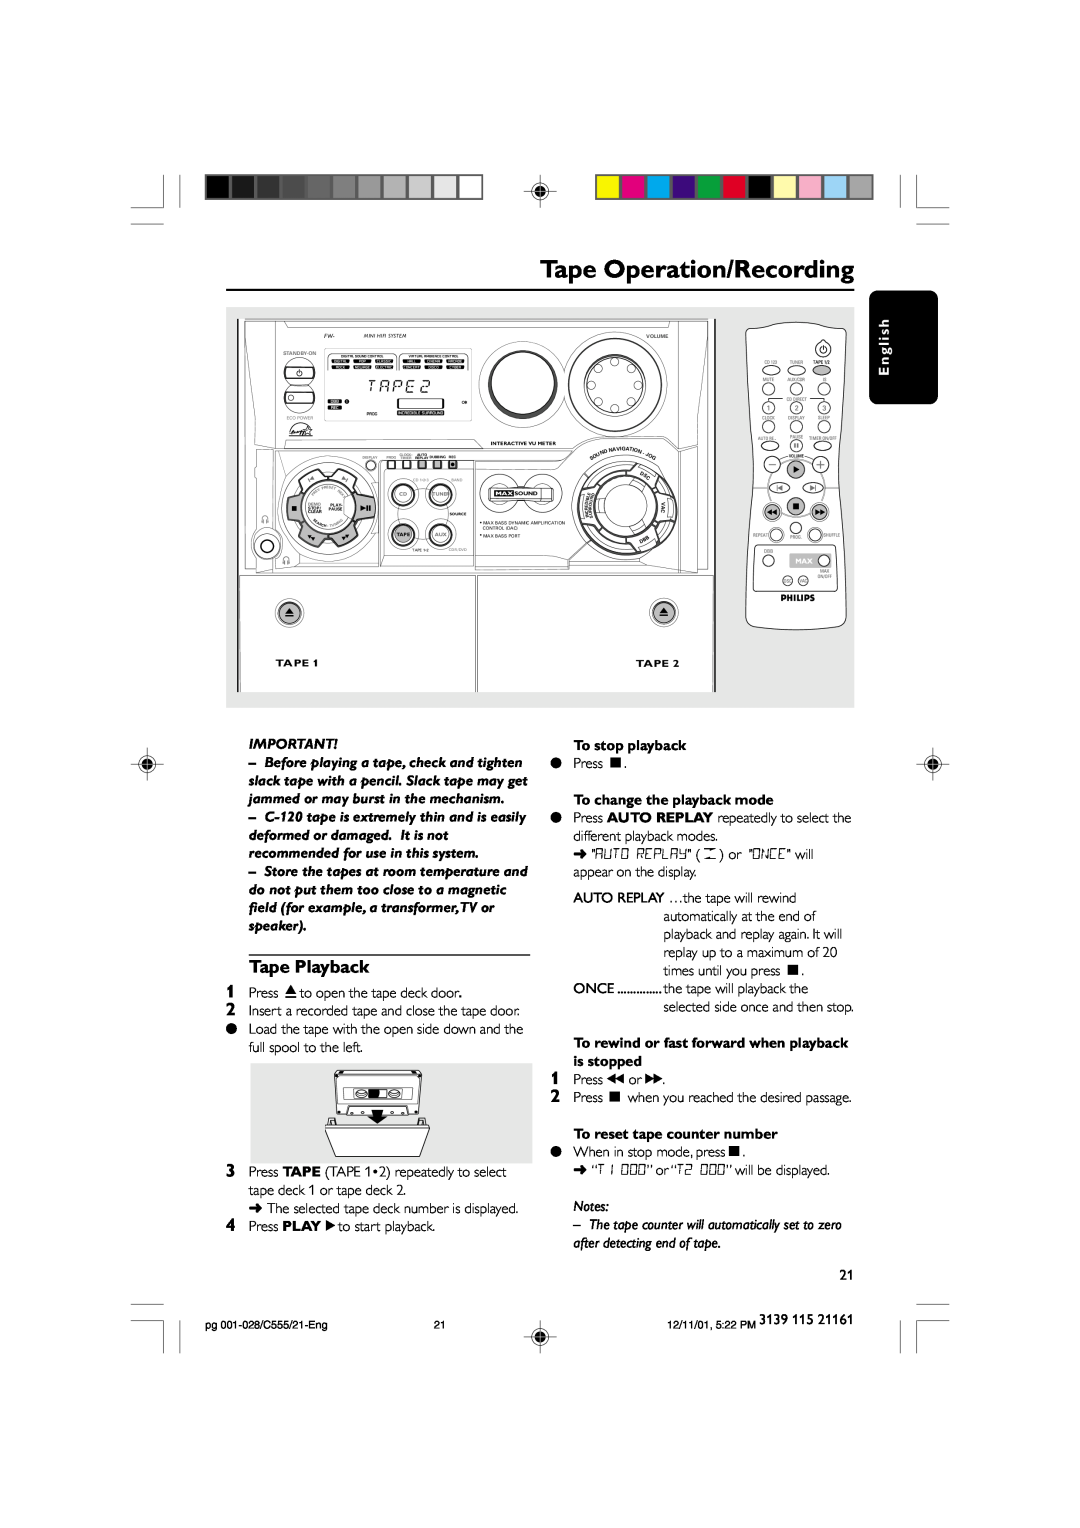 Philips C555 manual Tape Operation/Recording, Tape Playback, To change the playback mode, To reset tape counter number 